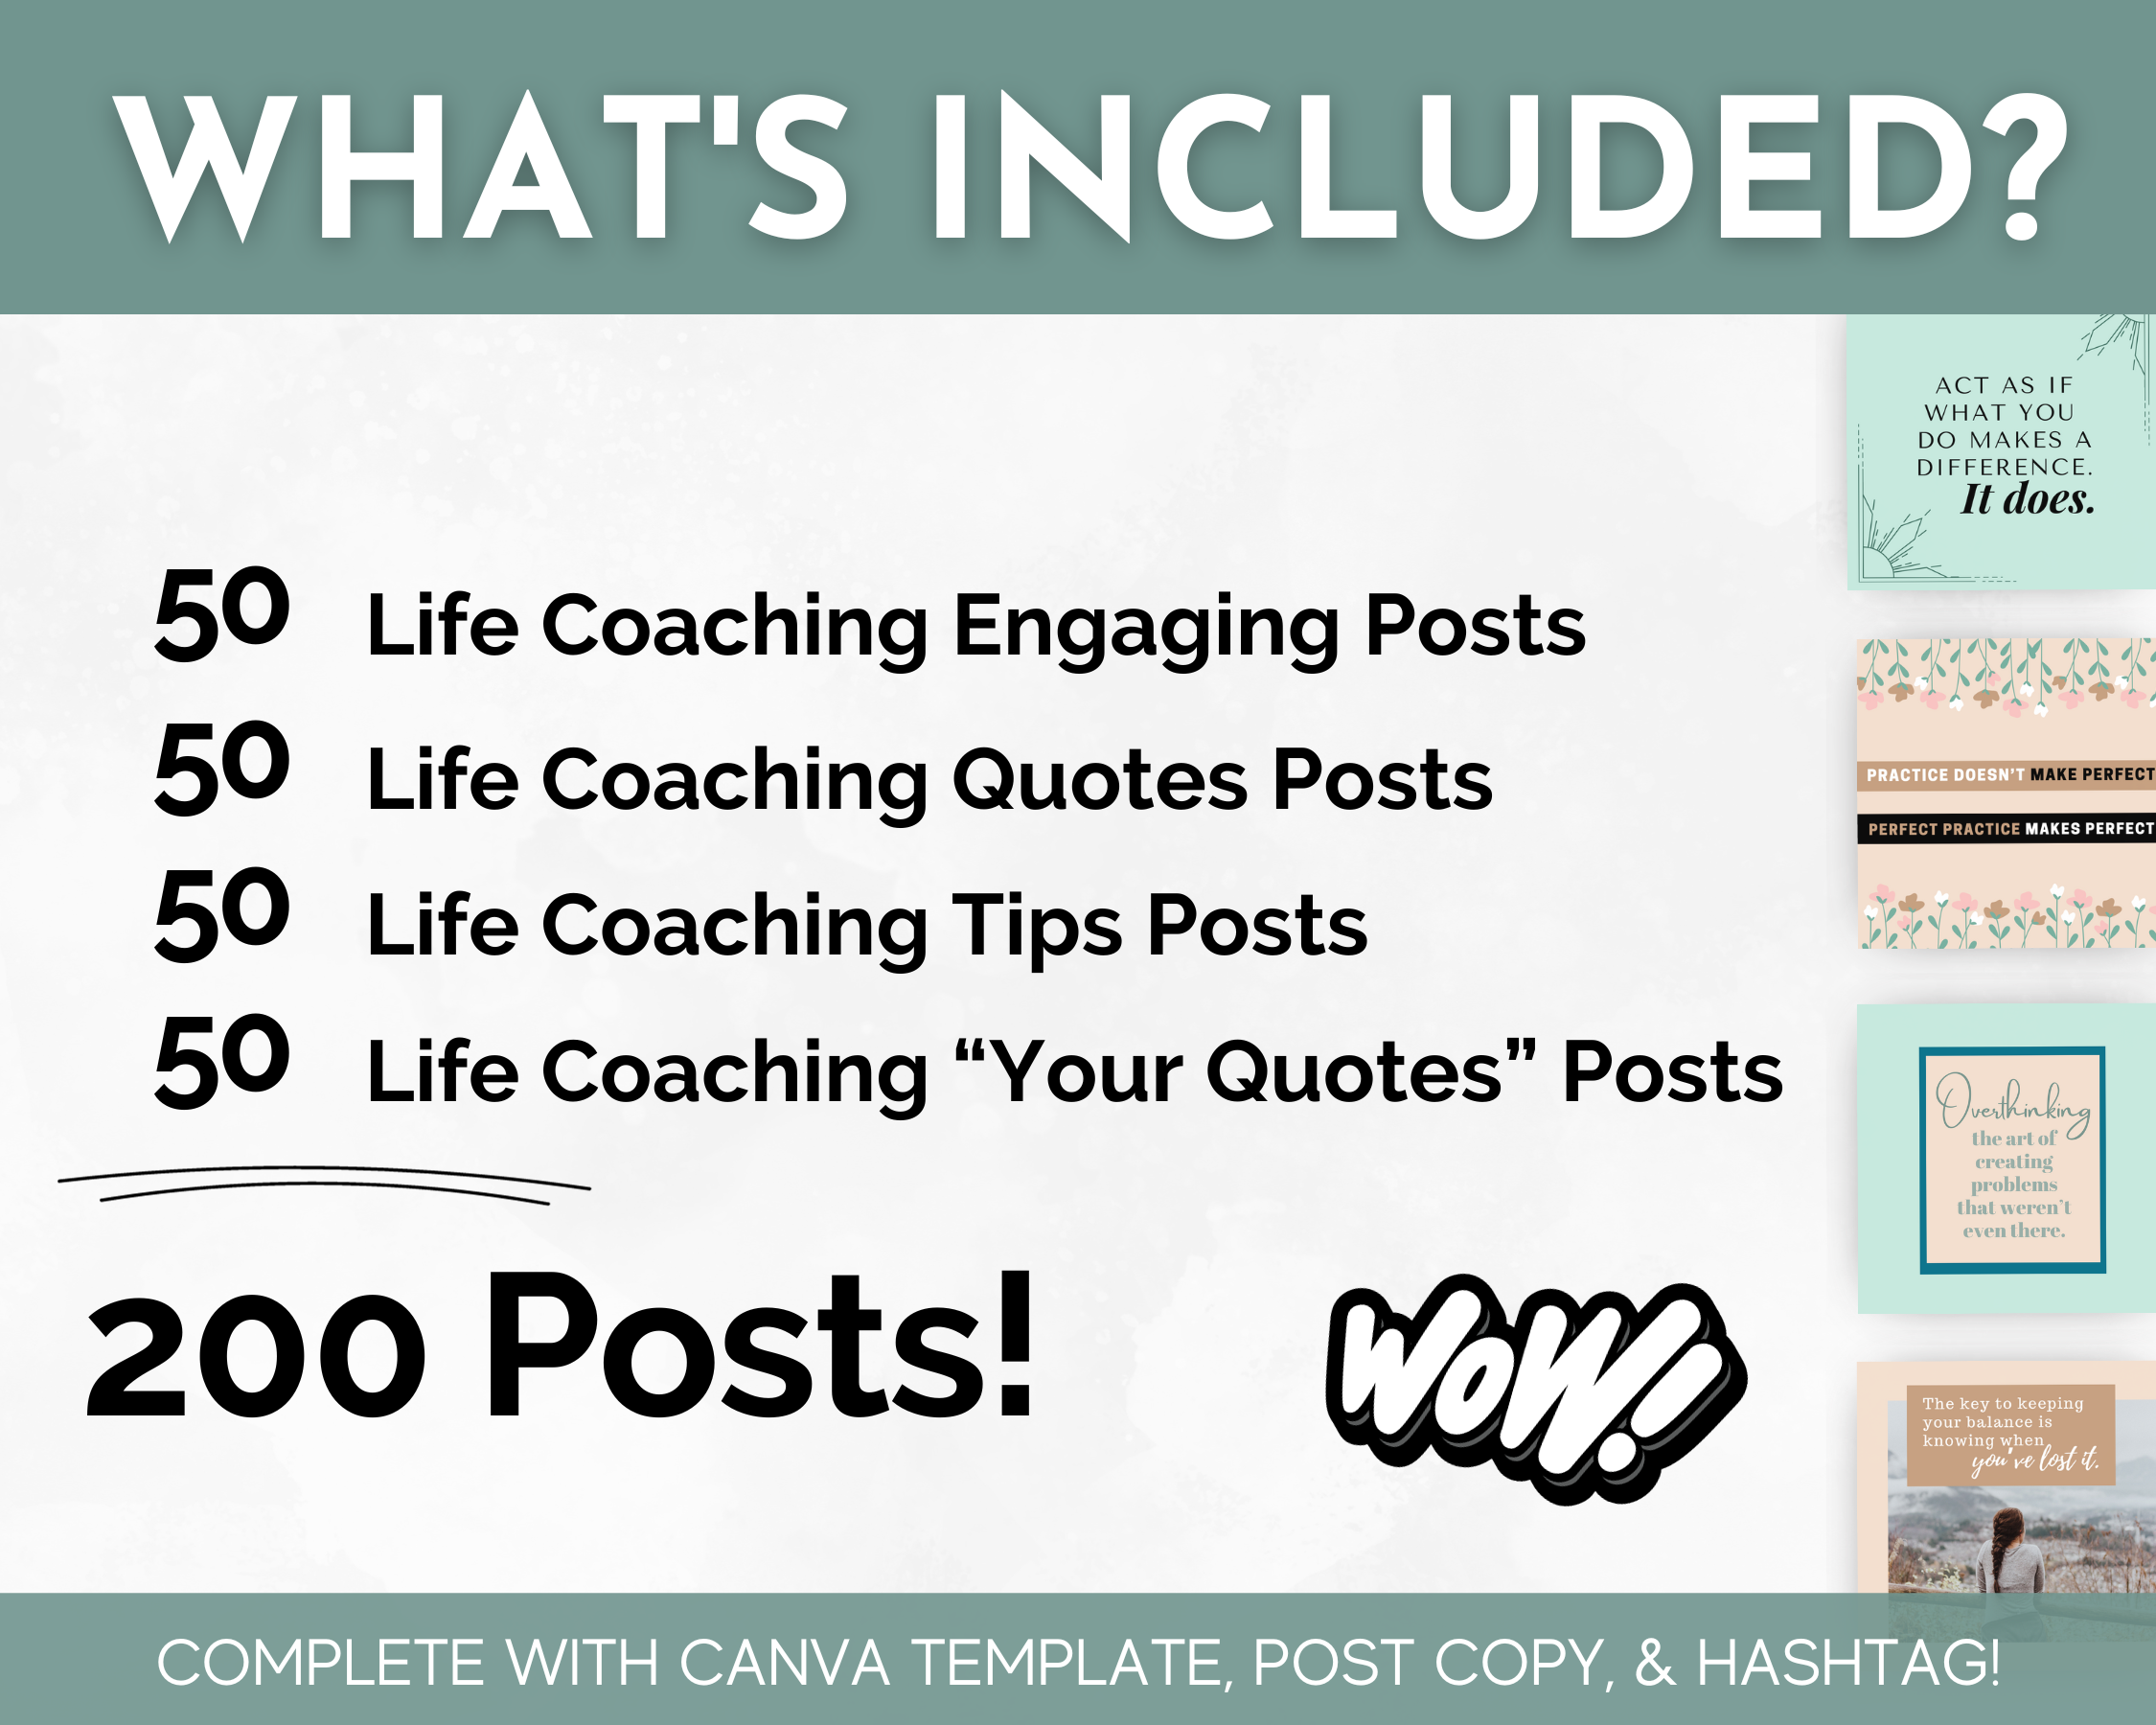 Promotional graphic for a Socially Inclined Life Coaching Social Media Post Bundle with Canva Templates, including engaging posts, tips, and quotes with a total of 200 posts focused on lifestyle changes, complete with Canva template and post copy.